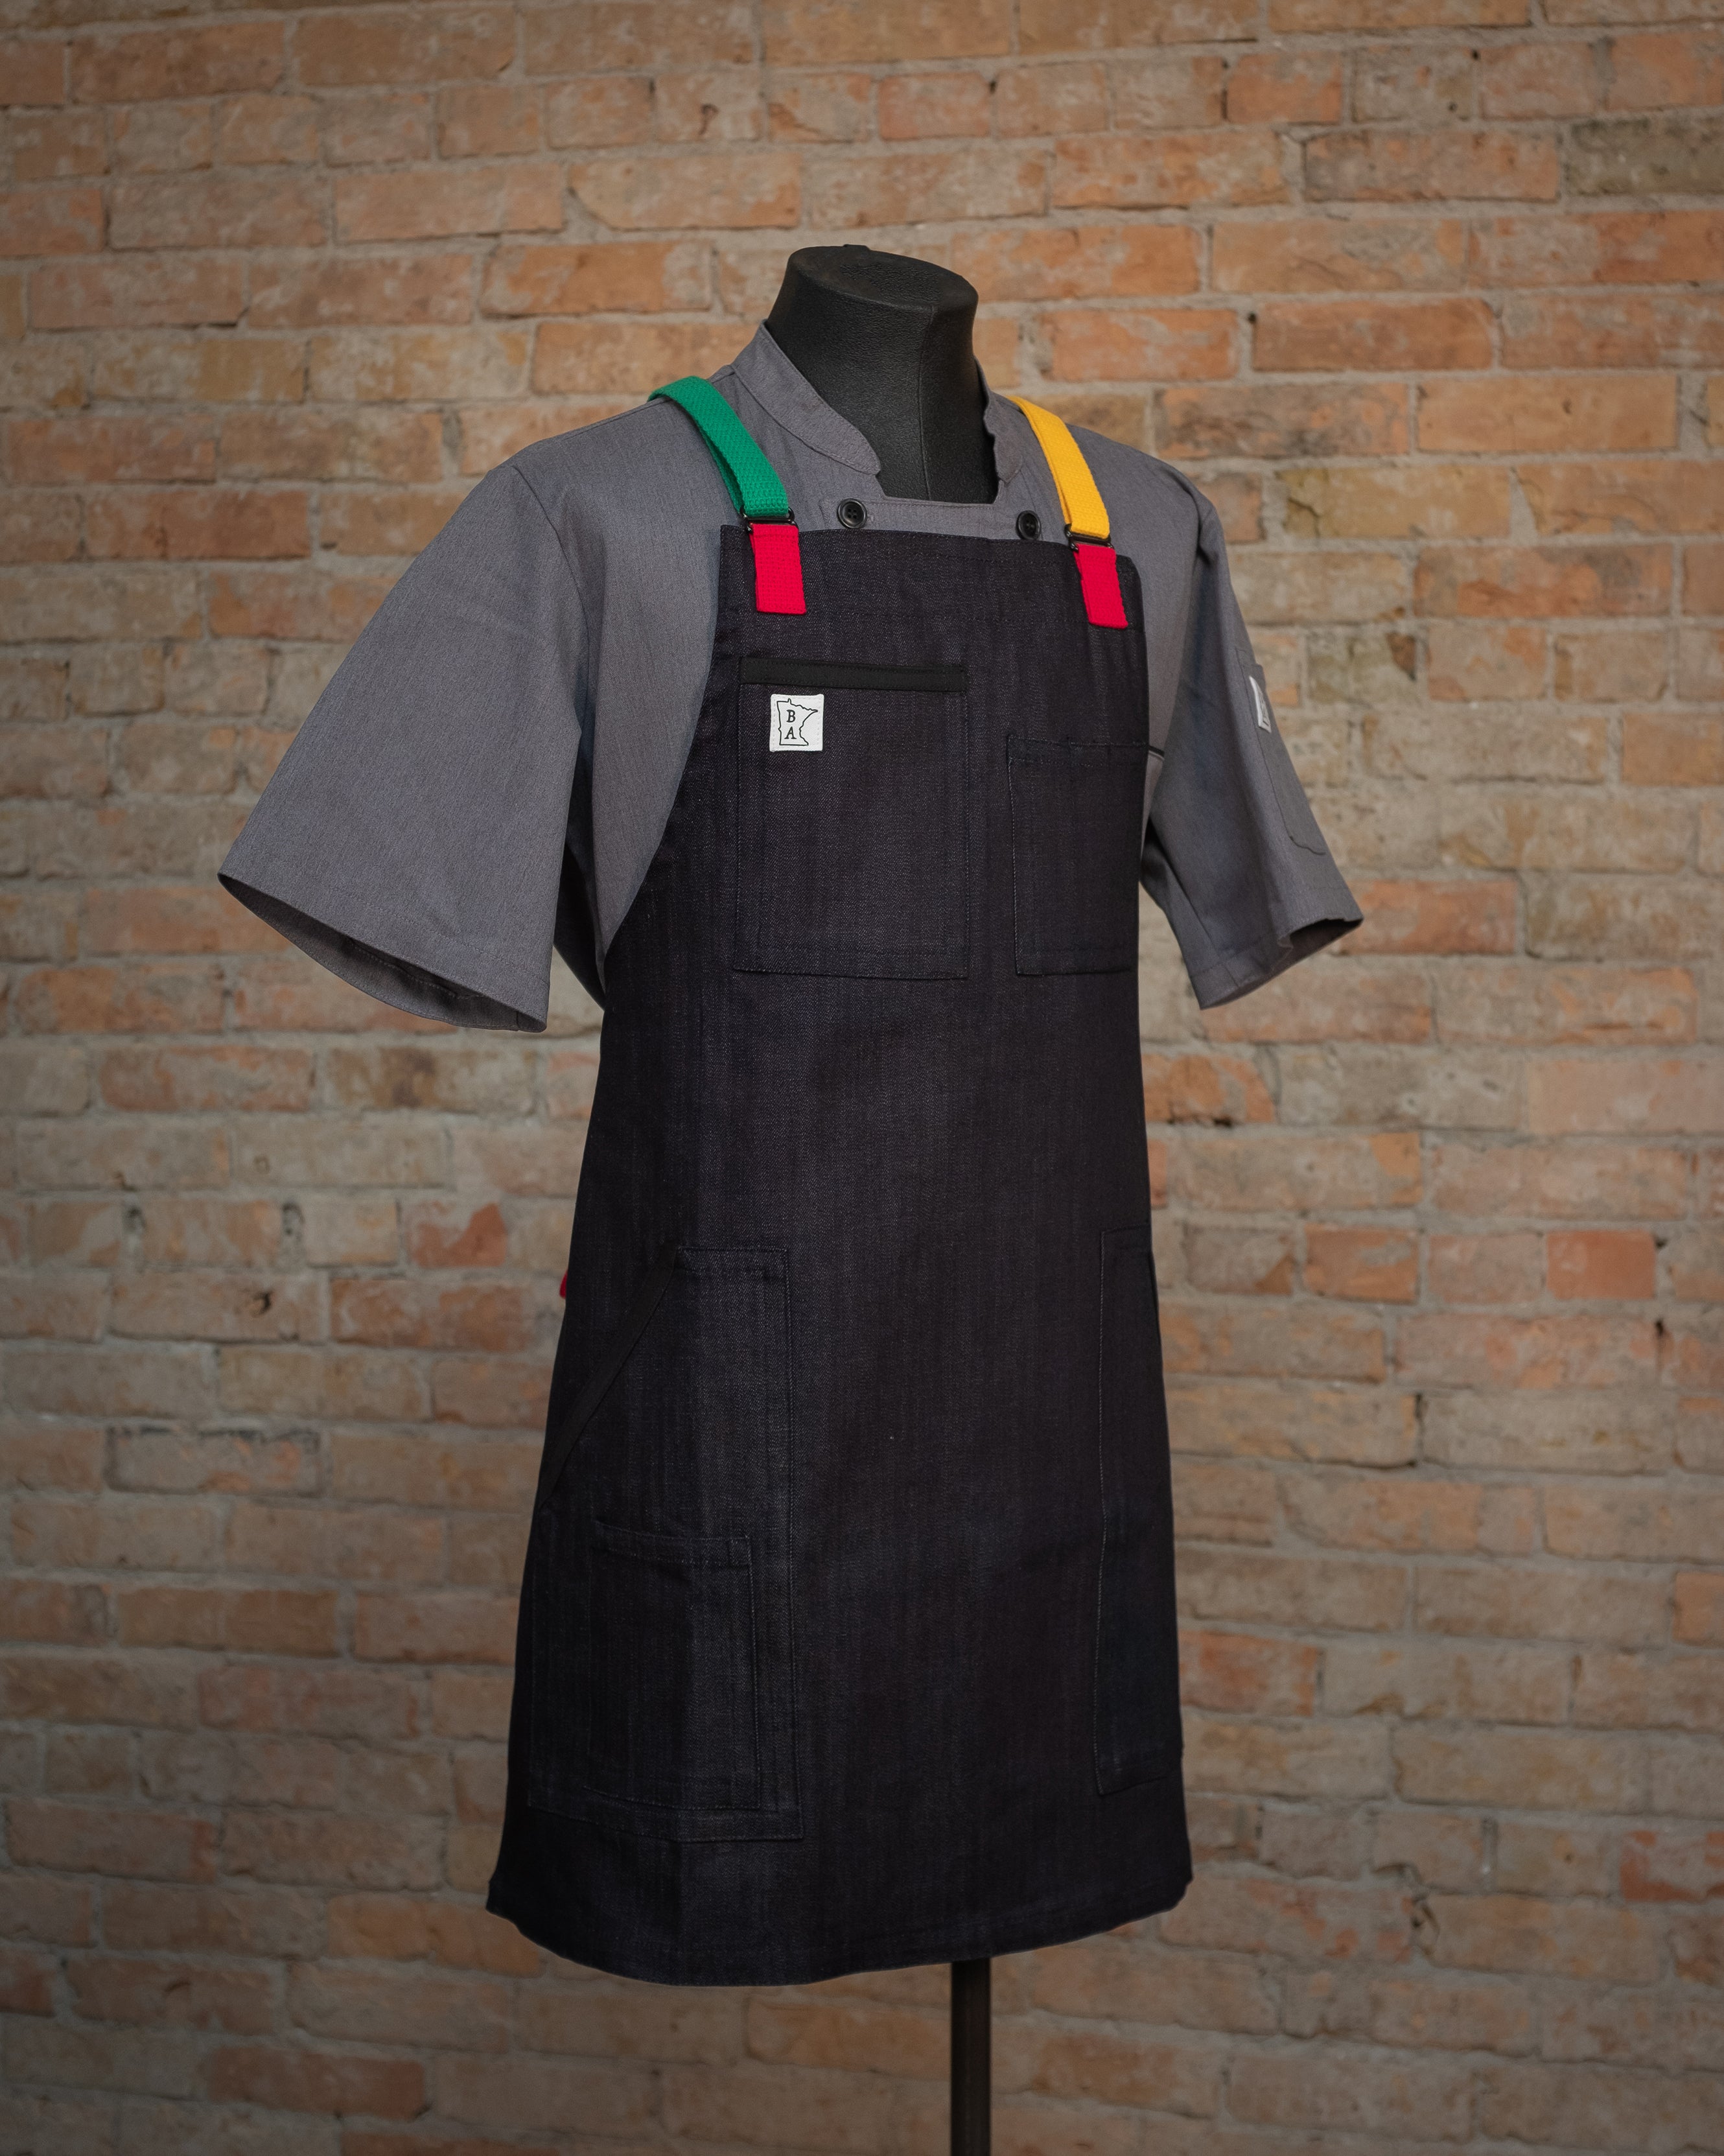 The denim apron design Marley displayed on a mannequin over a gray chef coat. Both the chef coat and the apron were designed and produced by Craftmade Aprons, Minnesota. 